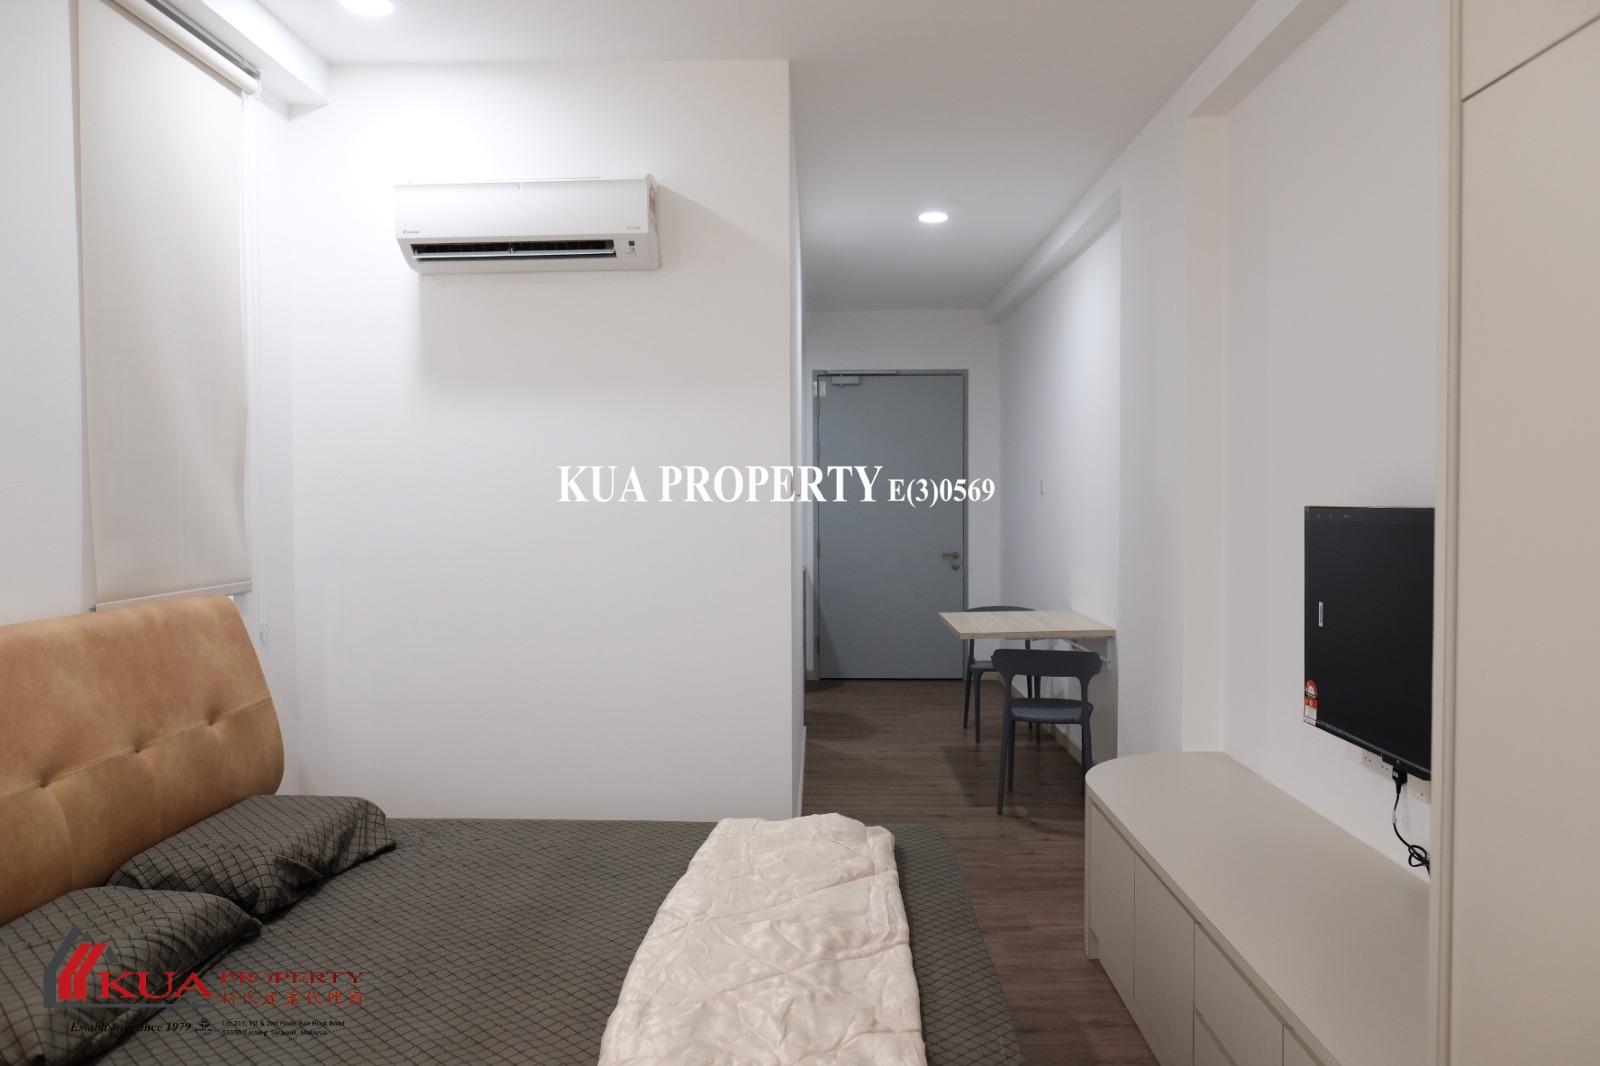 Avona Residence (Studio Unit) FOR RENT! at Northbank, Tabuan Tranquility